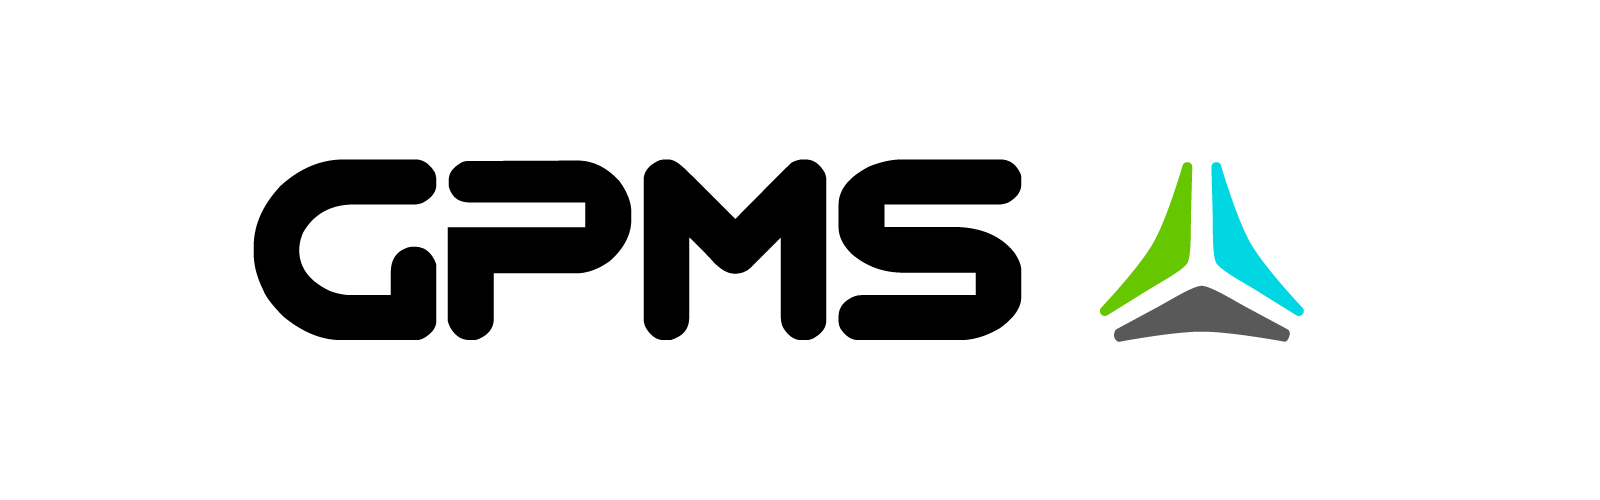 PRESS RELEASE: Hearst Ventures Invests in GPMS and its Breakthrough Technology for Monitoring the Health of Helicopters and Other Complex Machines